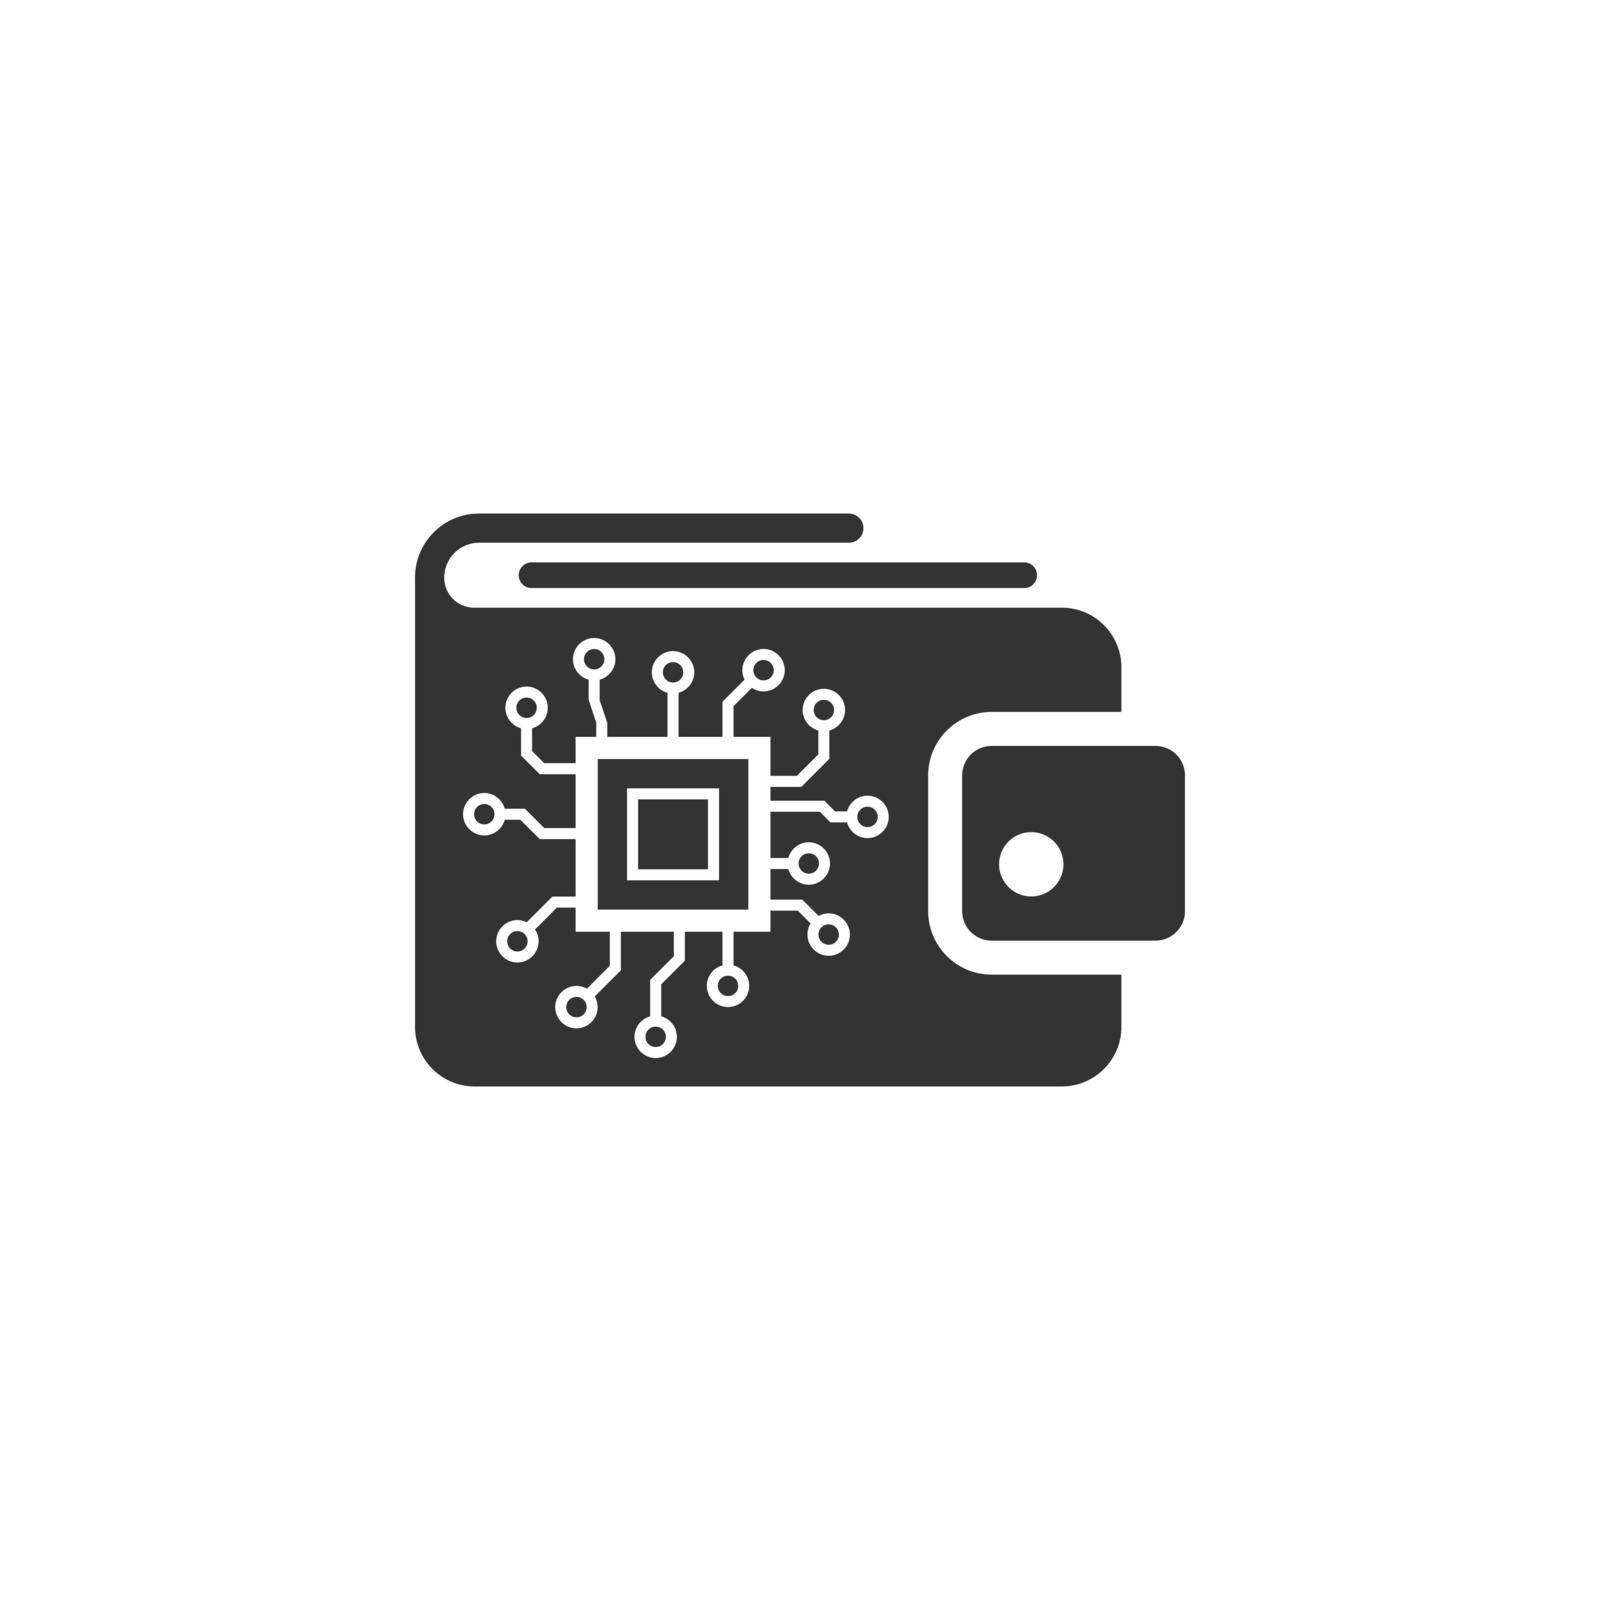 Digital wallet icon in flat style. Crypto bag vector illustration on white isolated background. Online finance, e-commerce business concept.